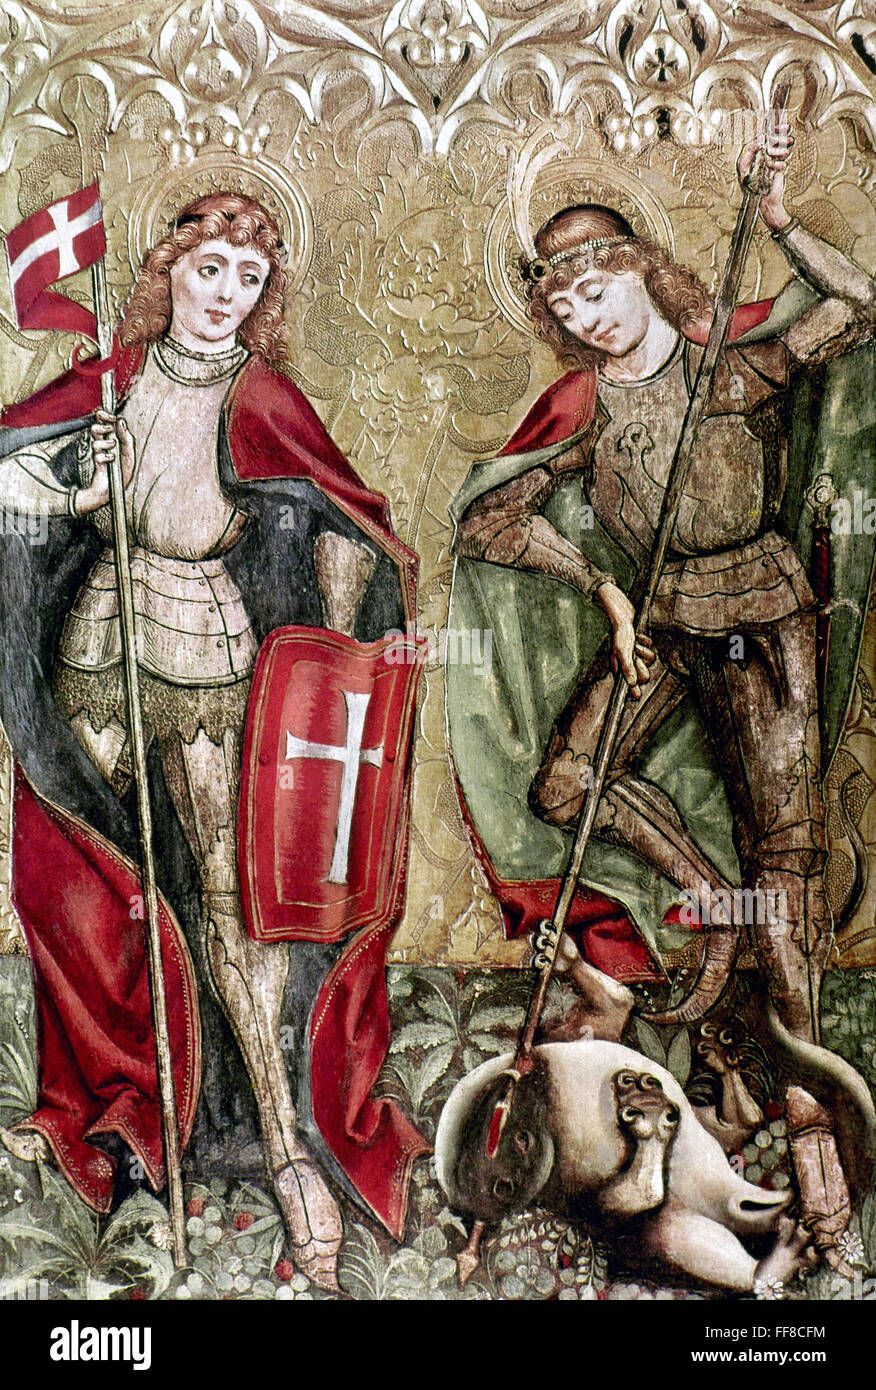 ST. FLORIAN & ST. GEORGE. /nWing of a triptych by Monogramist 'A', Polish School, 1477. Stock Photo